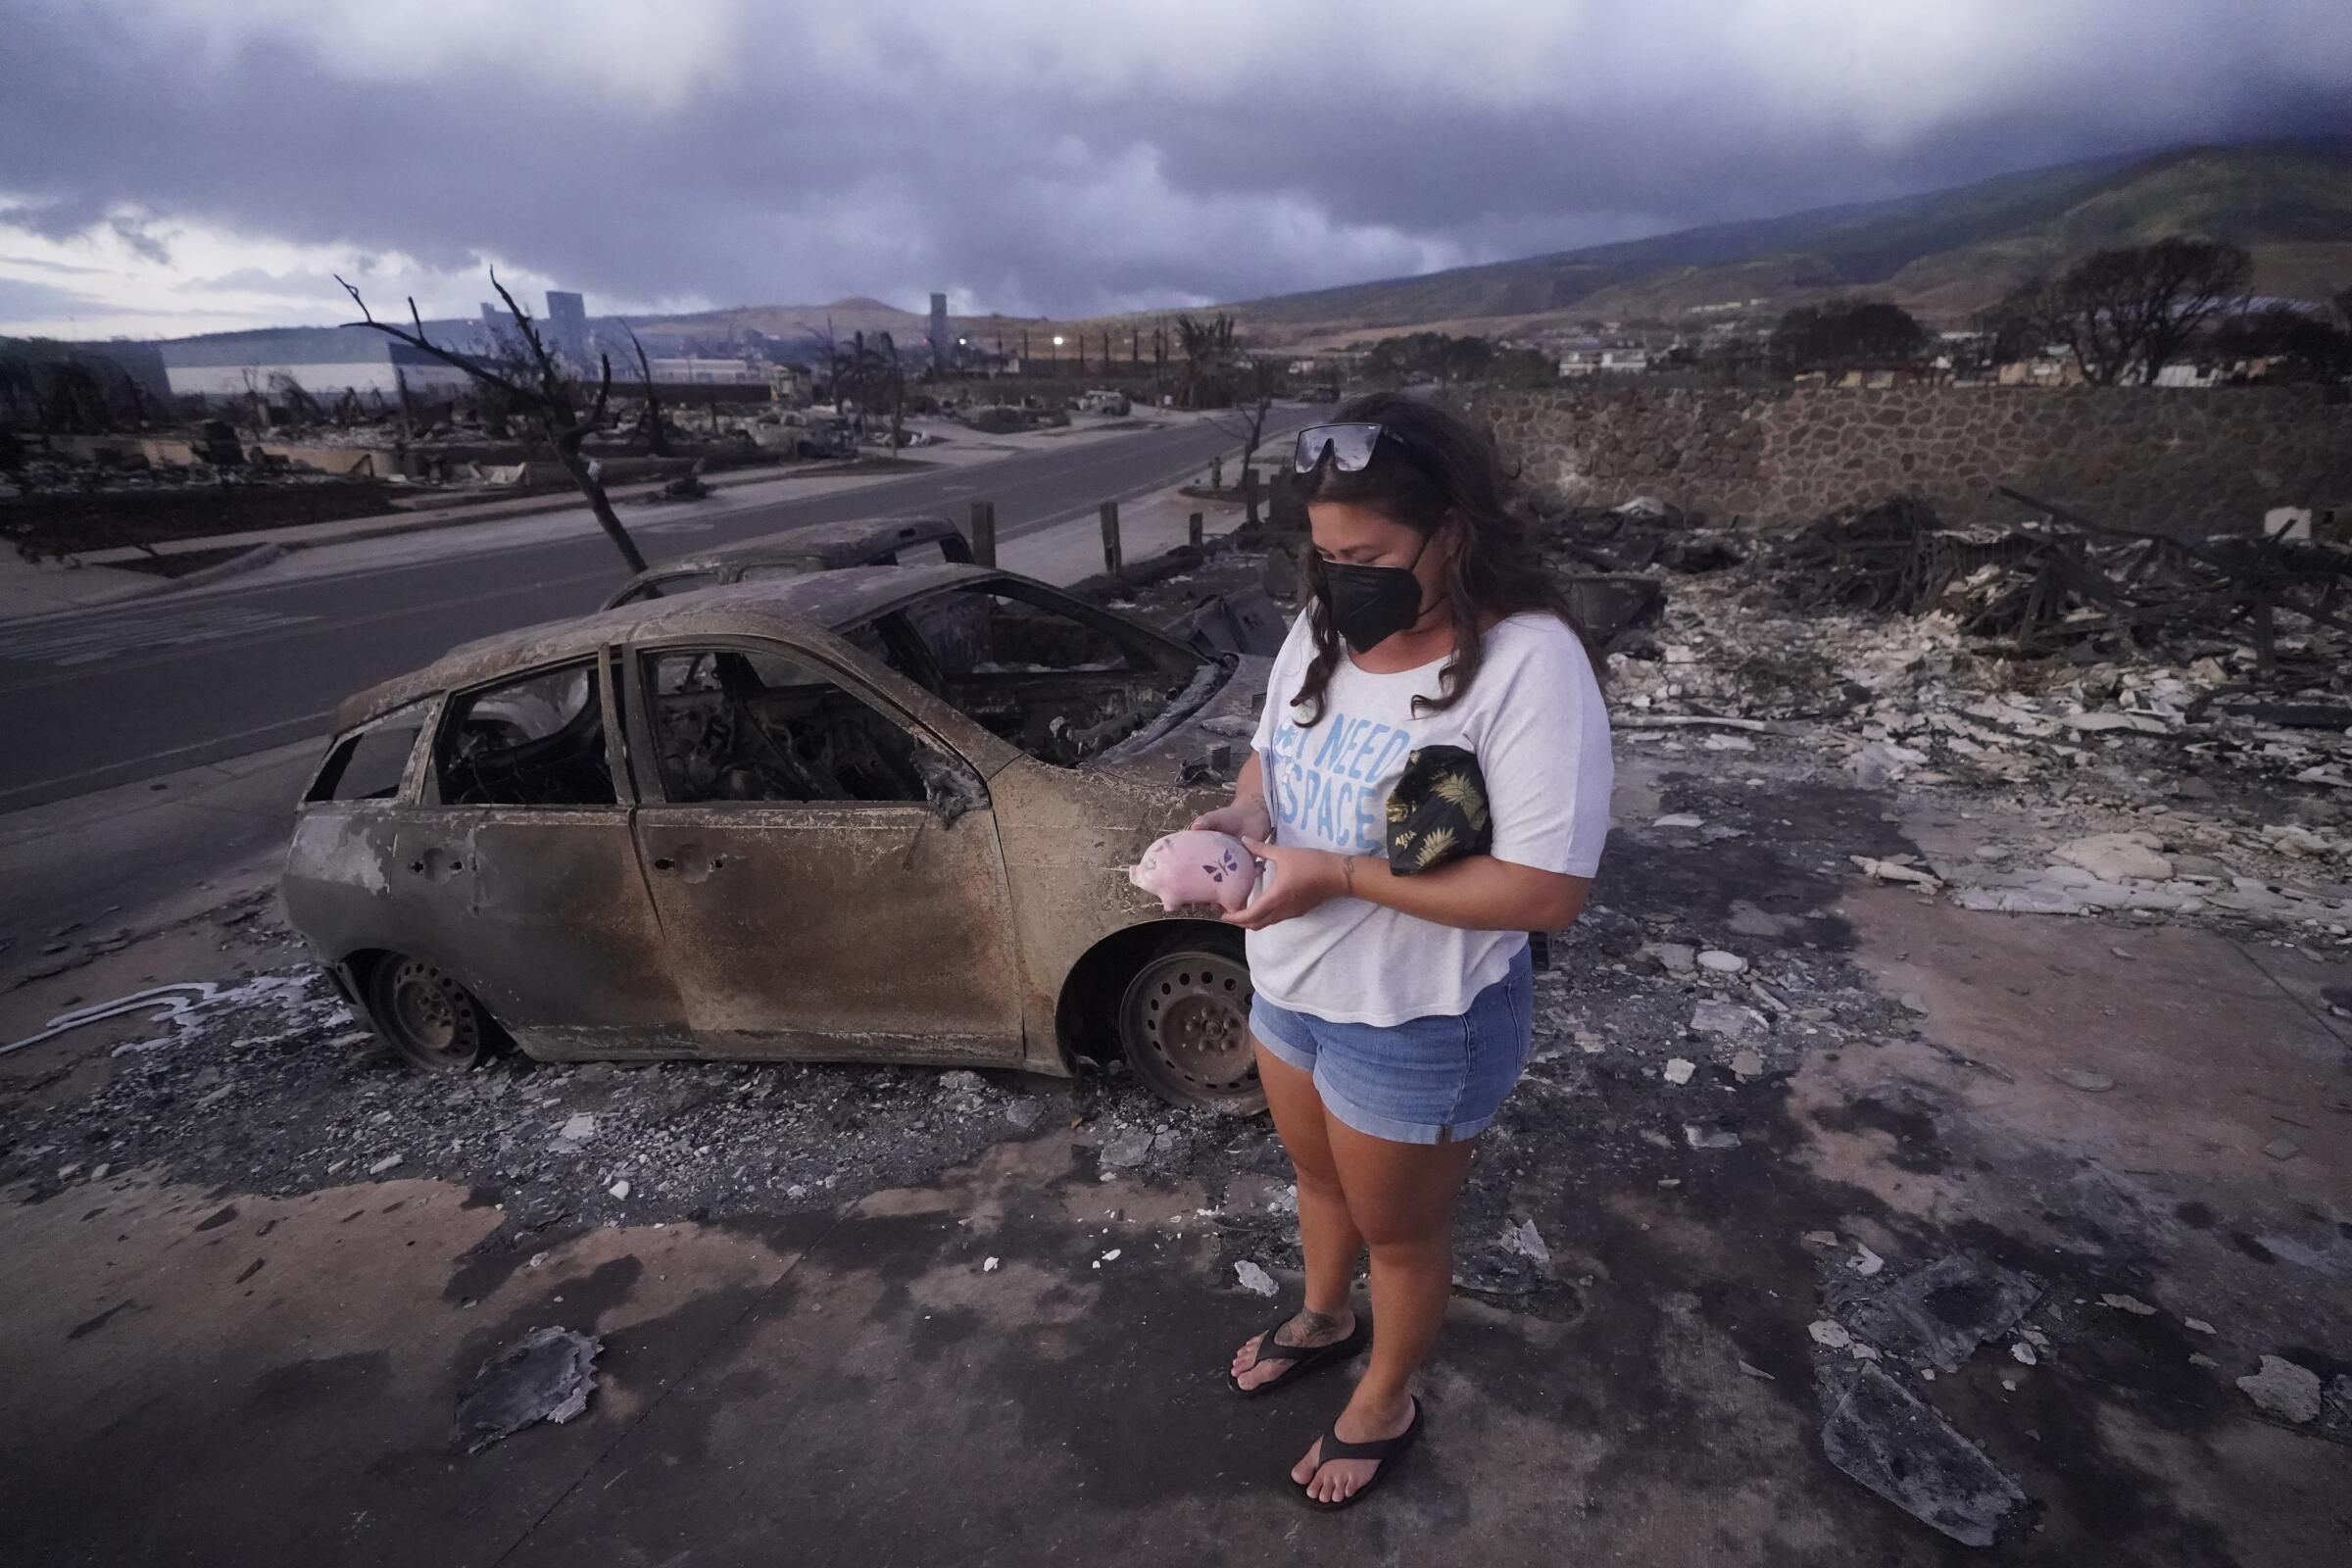 Maui fire exposes island's shocking lack of preparation - Los Angeles Times